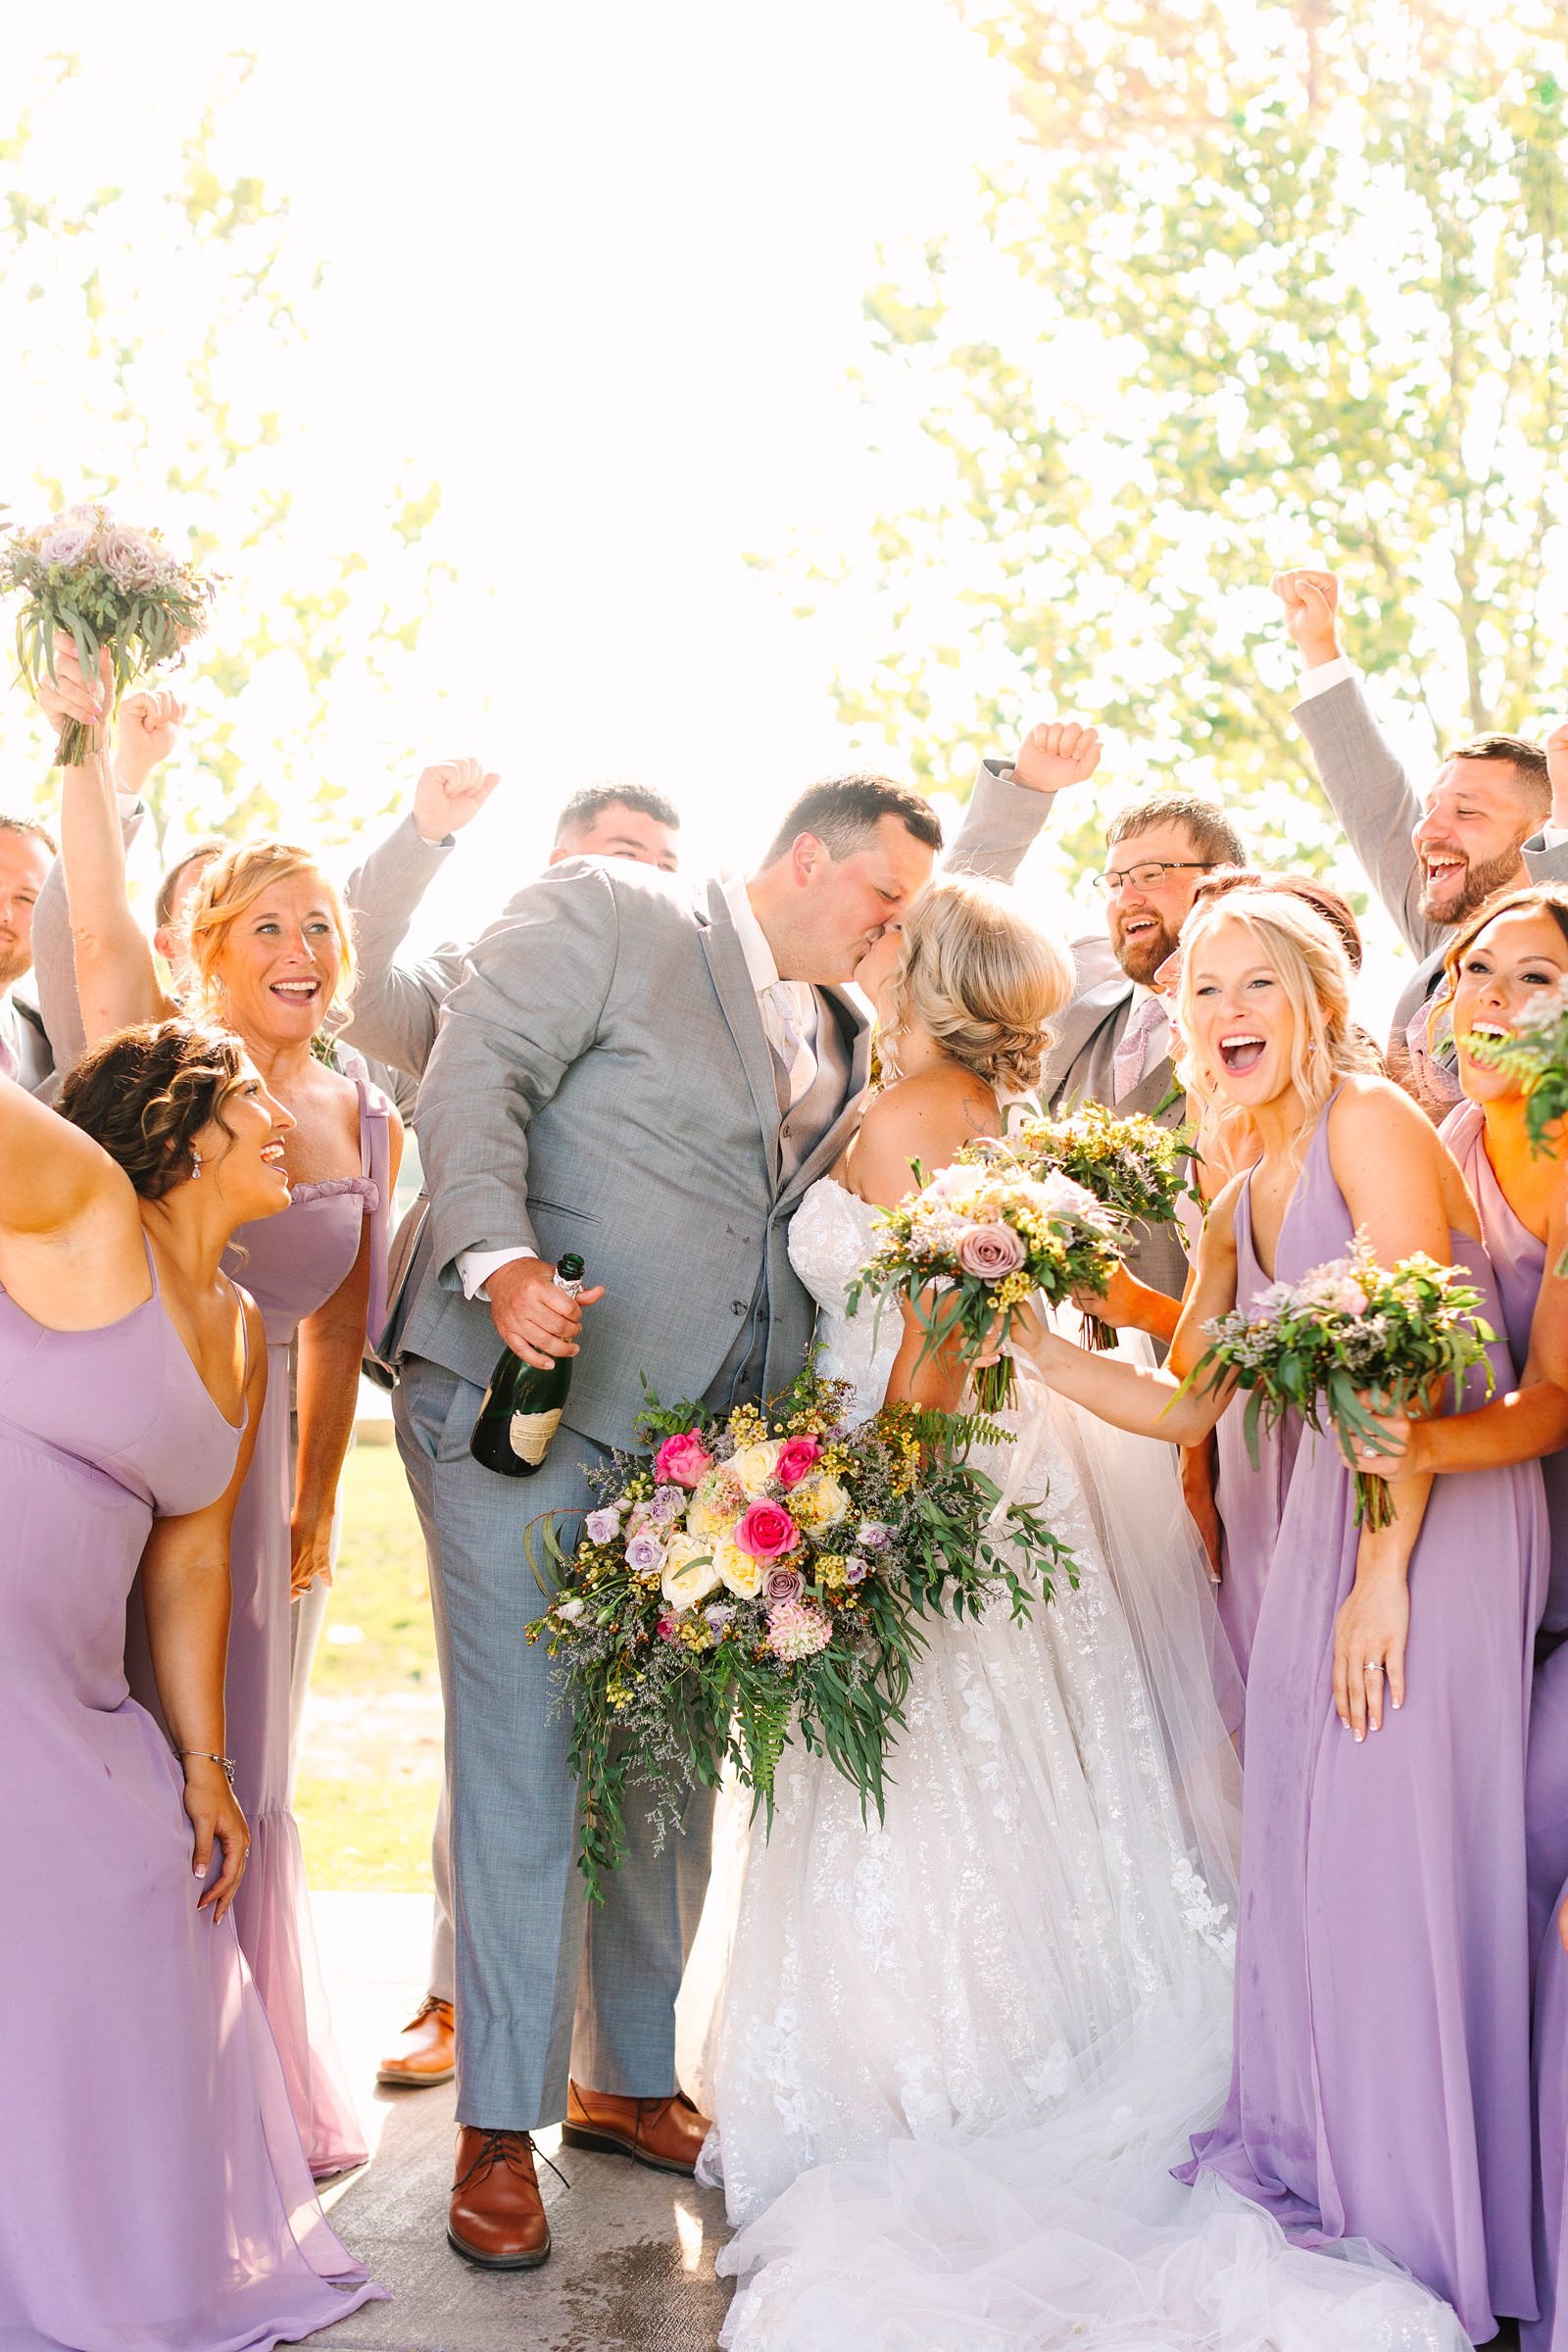 A Sunny Summer Wedding at Friedman Park in Newburgh Indiana | Paige and Dylan | Bret and Brandie Photography144.jpg